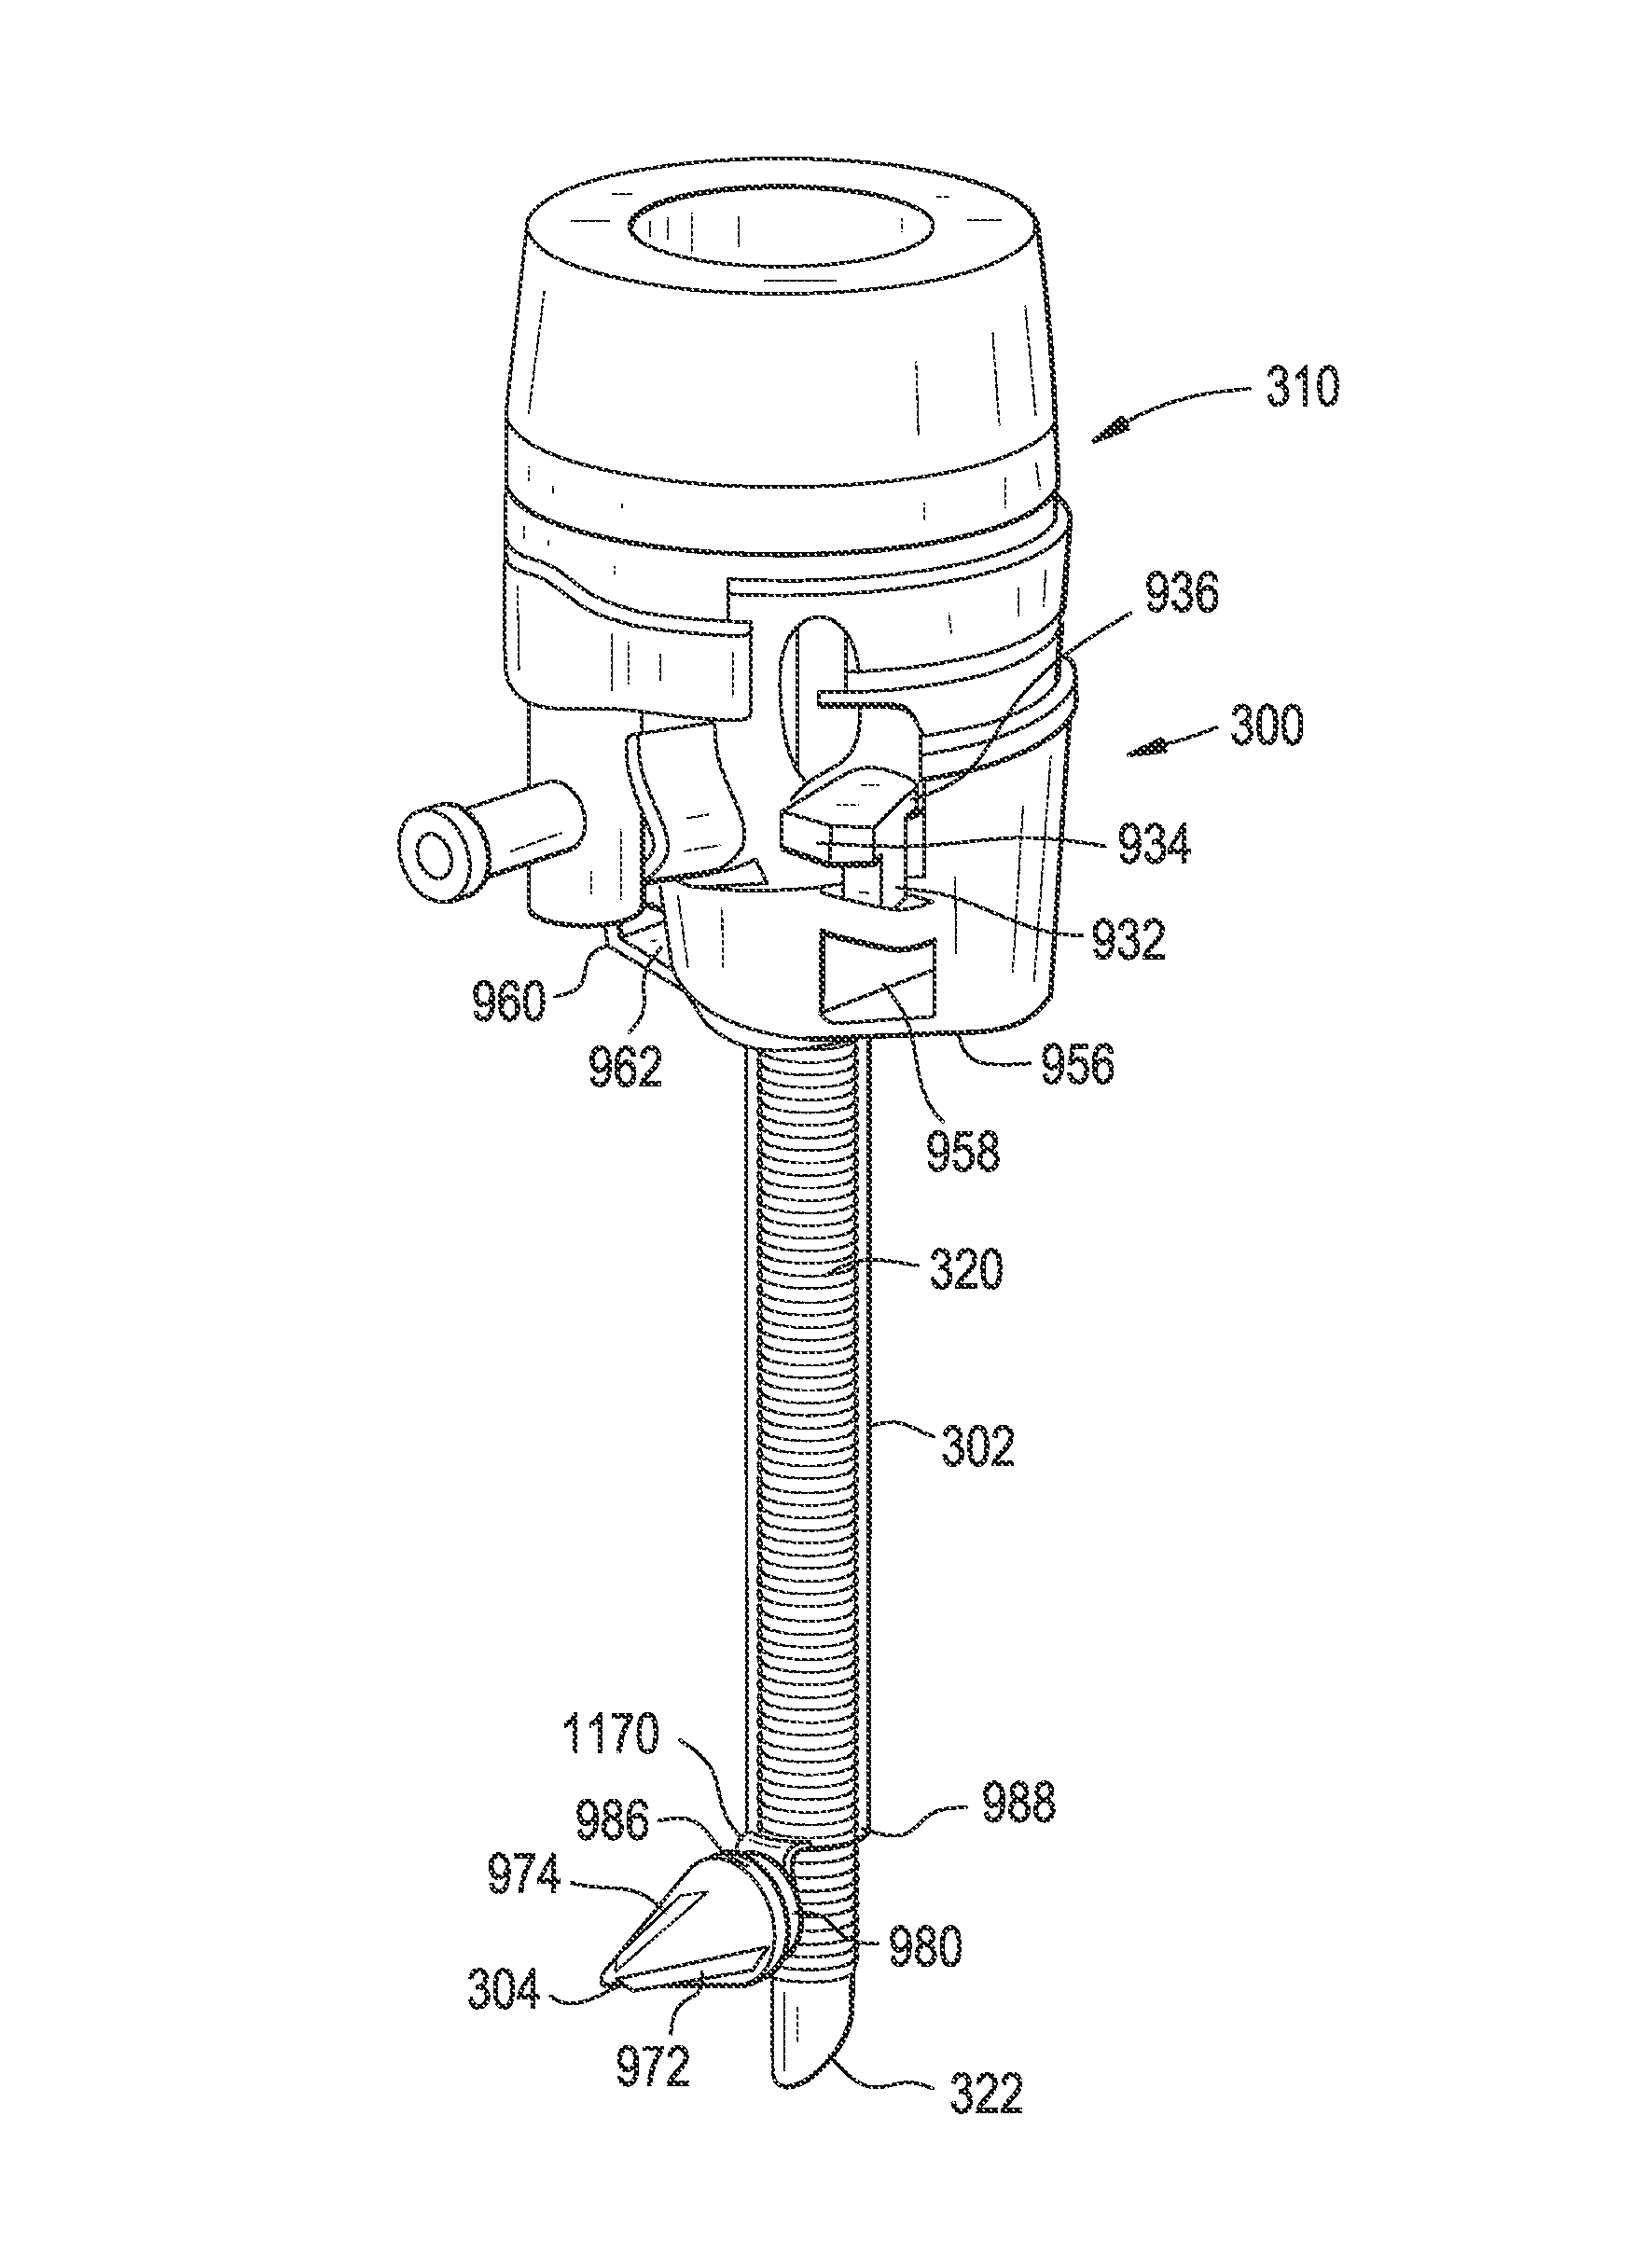 Device for anchoring a trocar